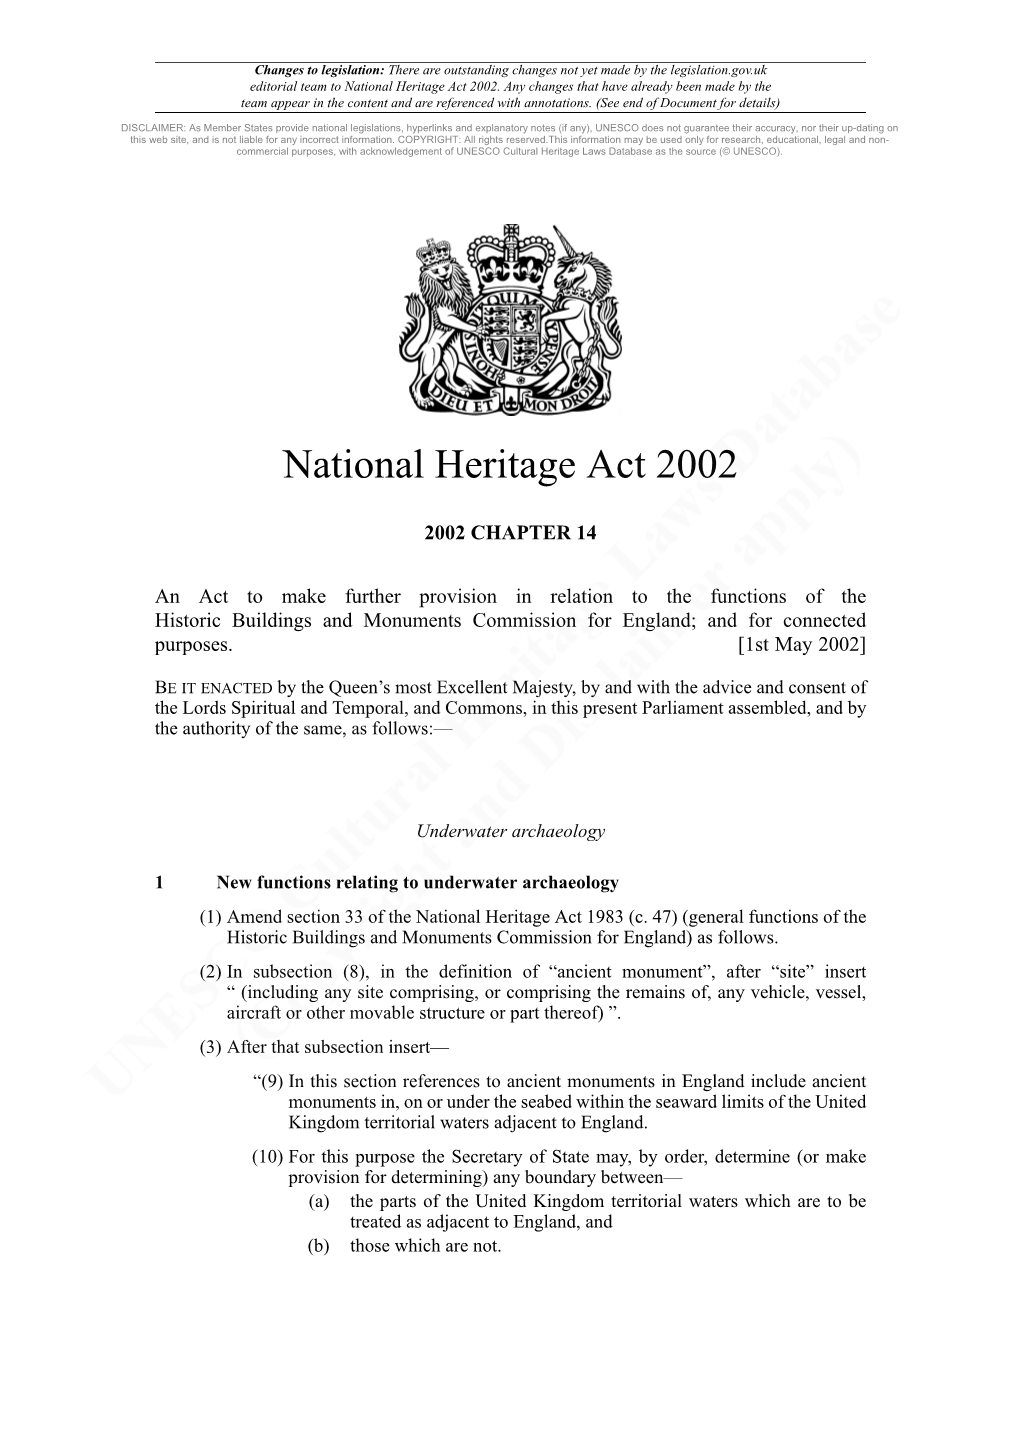 National Heritage Act 2002